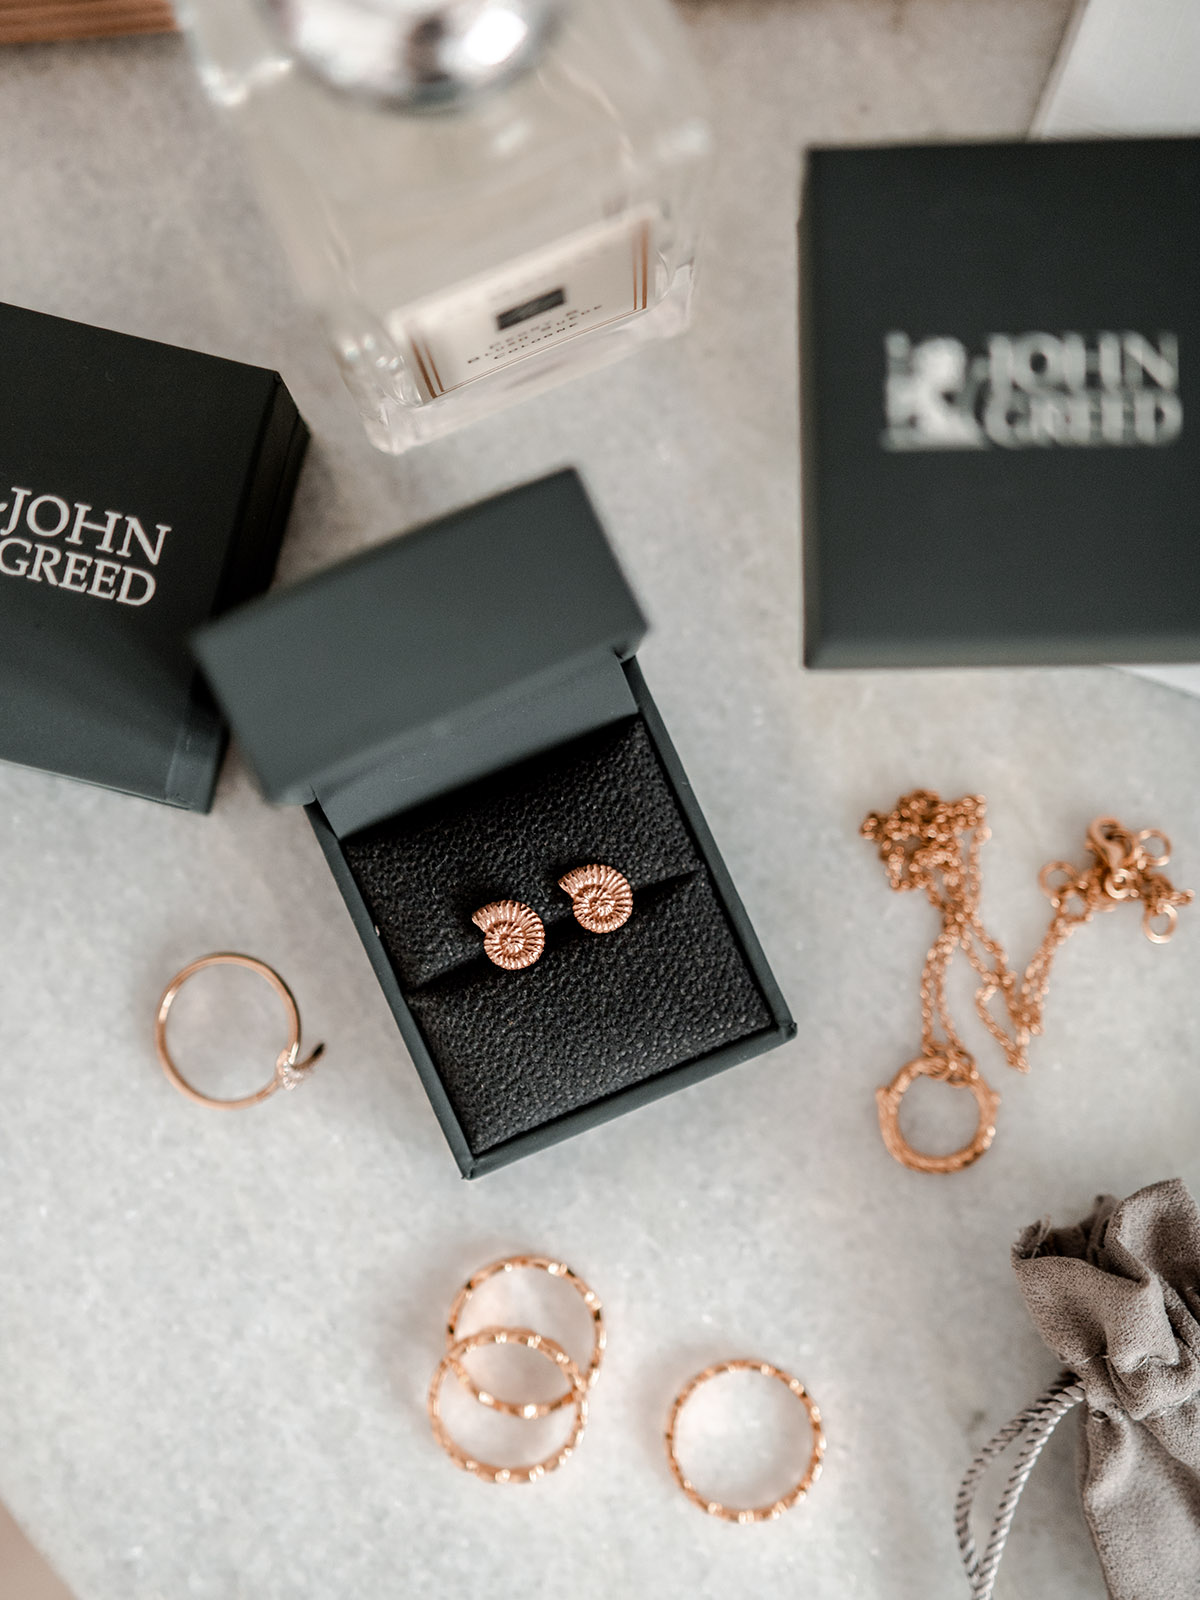 daisy london john greed jewellery review styling accessories gold necklace ring stack